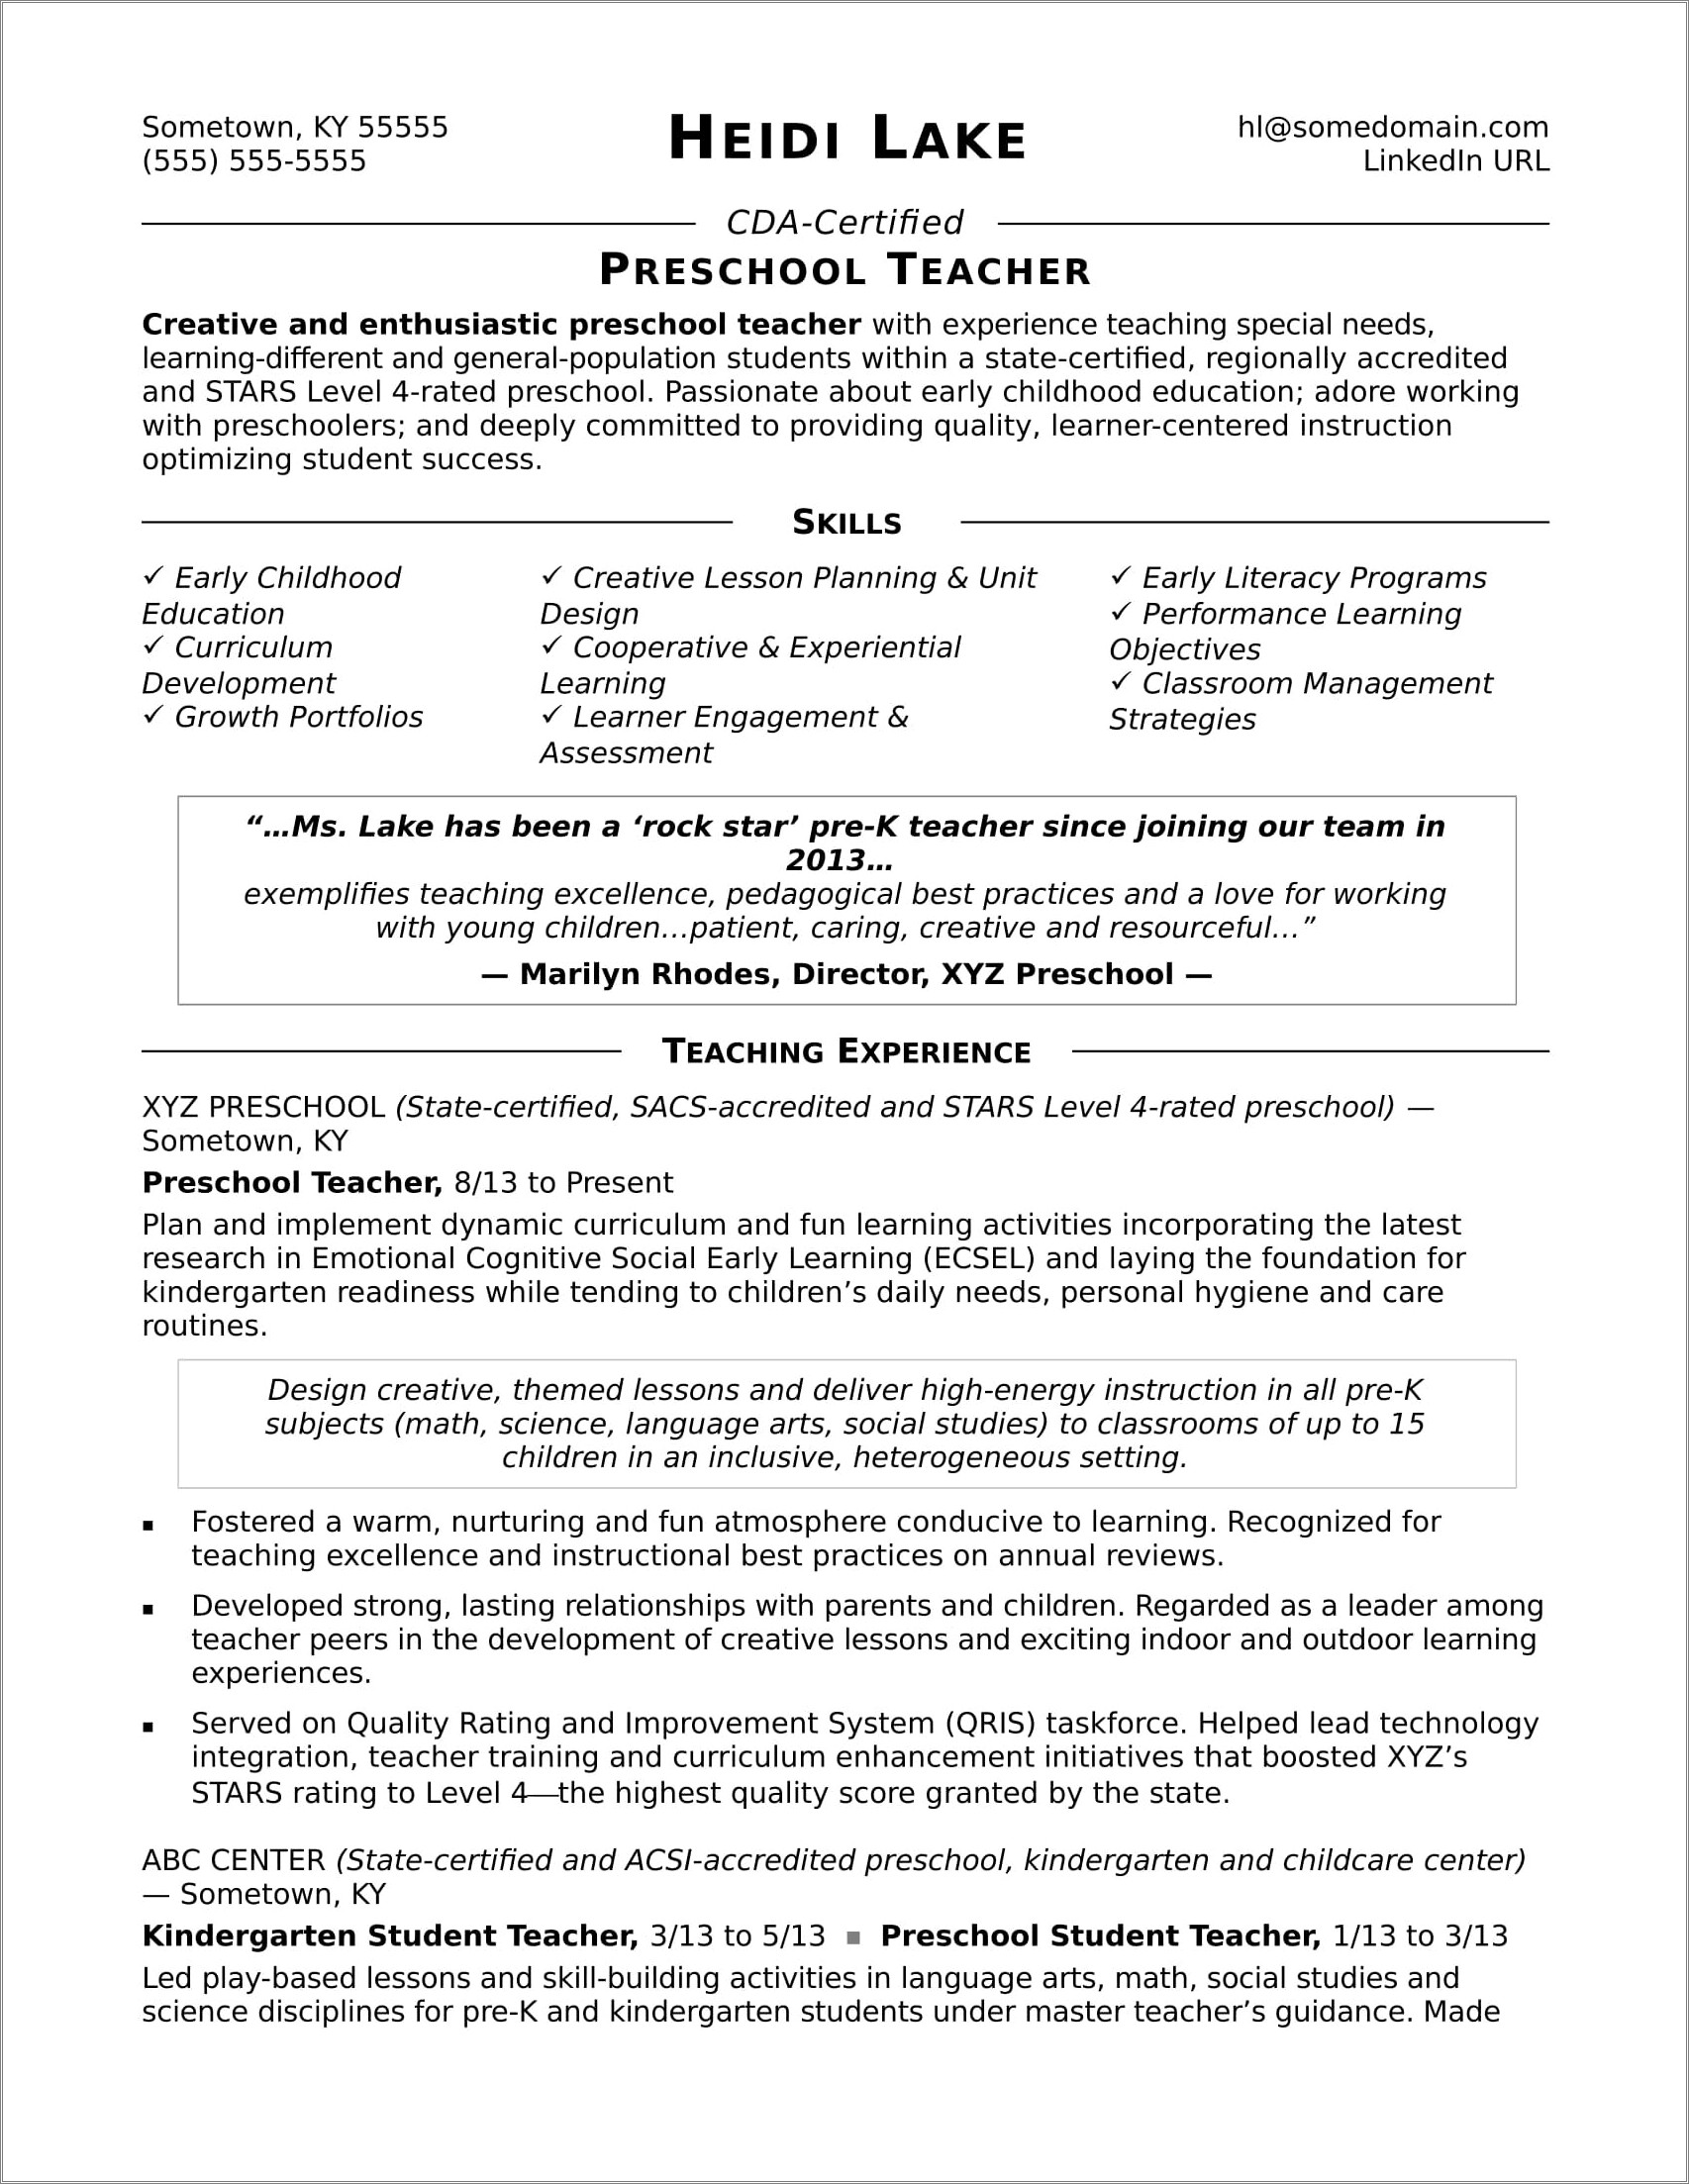 Resume For Child Care Assistant Example